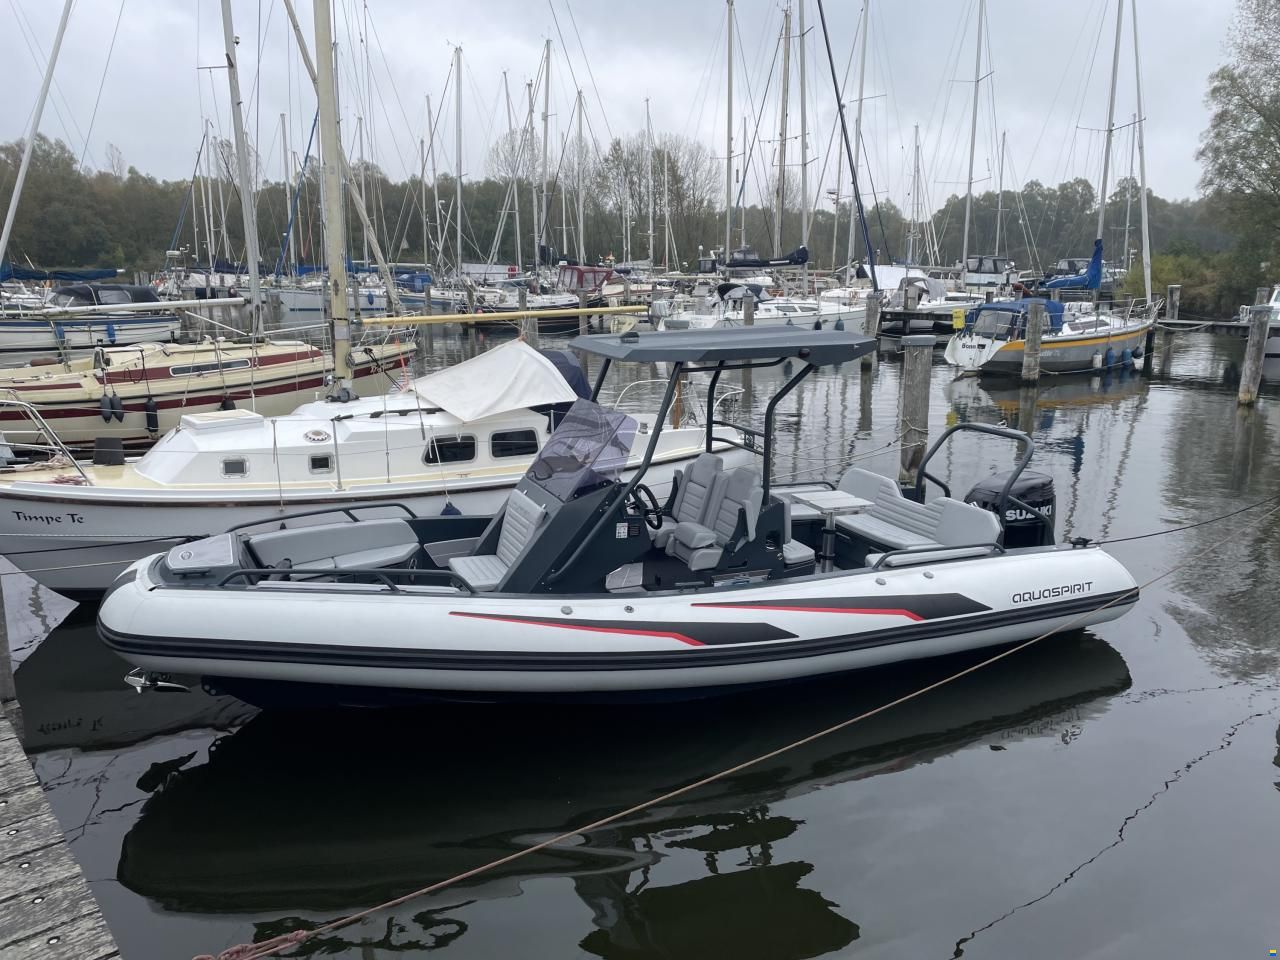 YAMAHA UF-33 OUTBOARD used boat in Japan for sale